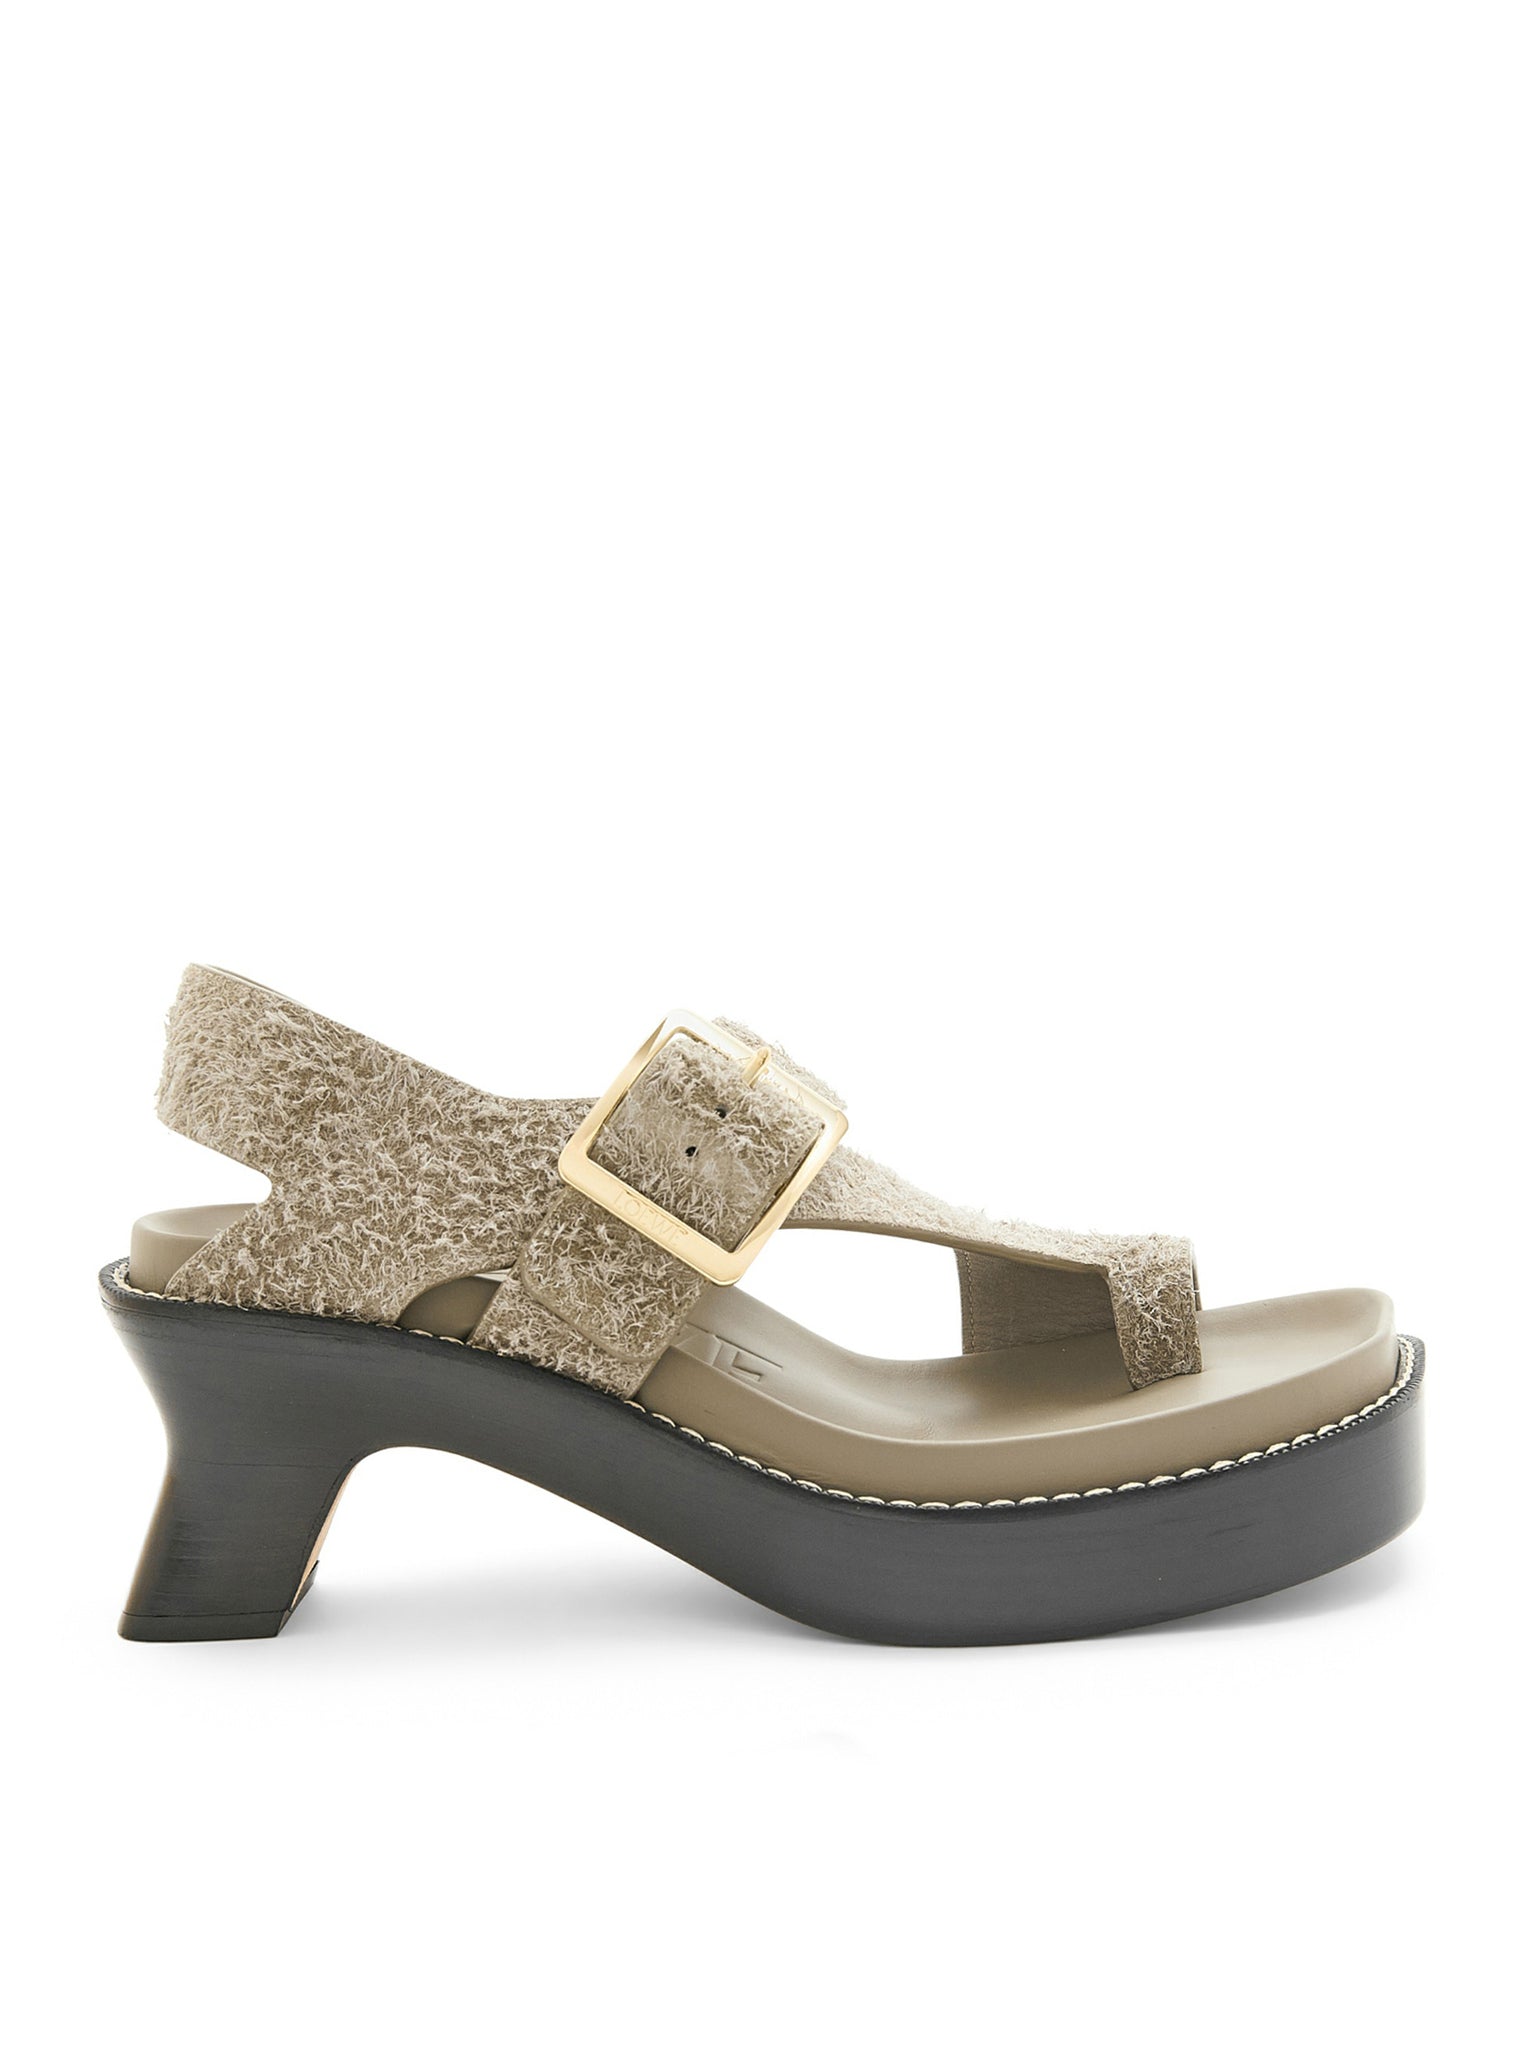 Ease heeled sandals in brushed suede